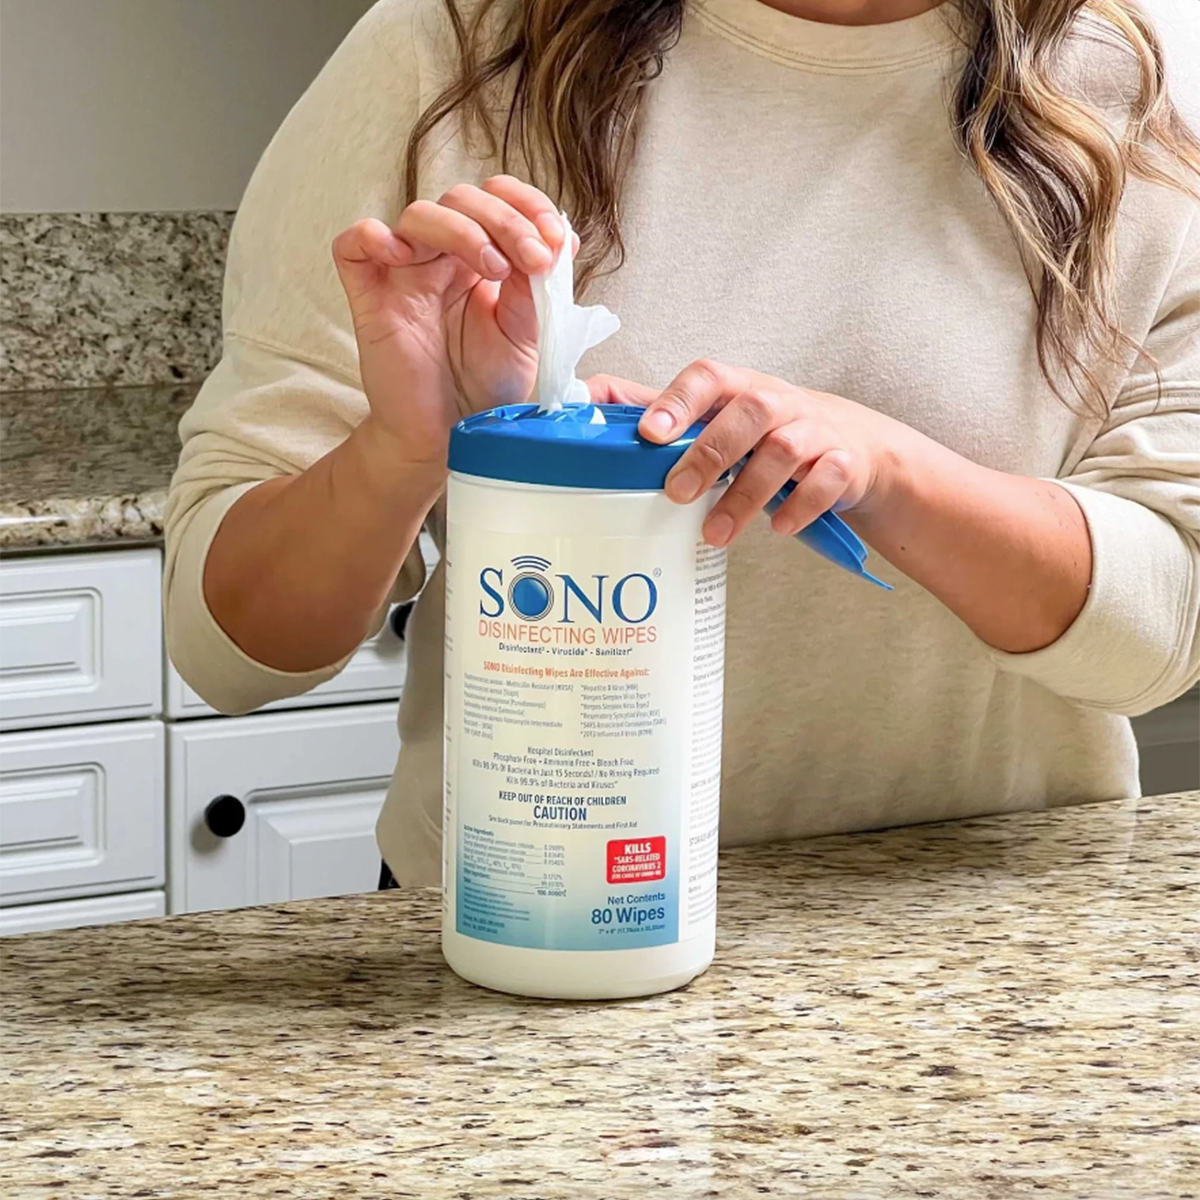 Easy-to-pull SONO Alcohol-Free Disinfecting Wipes being used on a kitchen counter, showcasing convenience and everyday use.